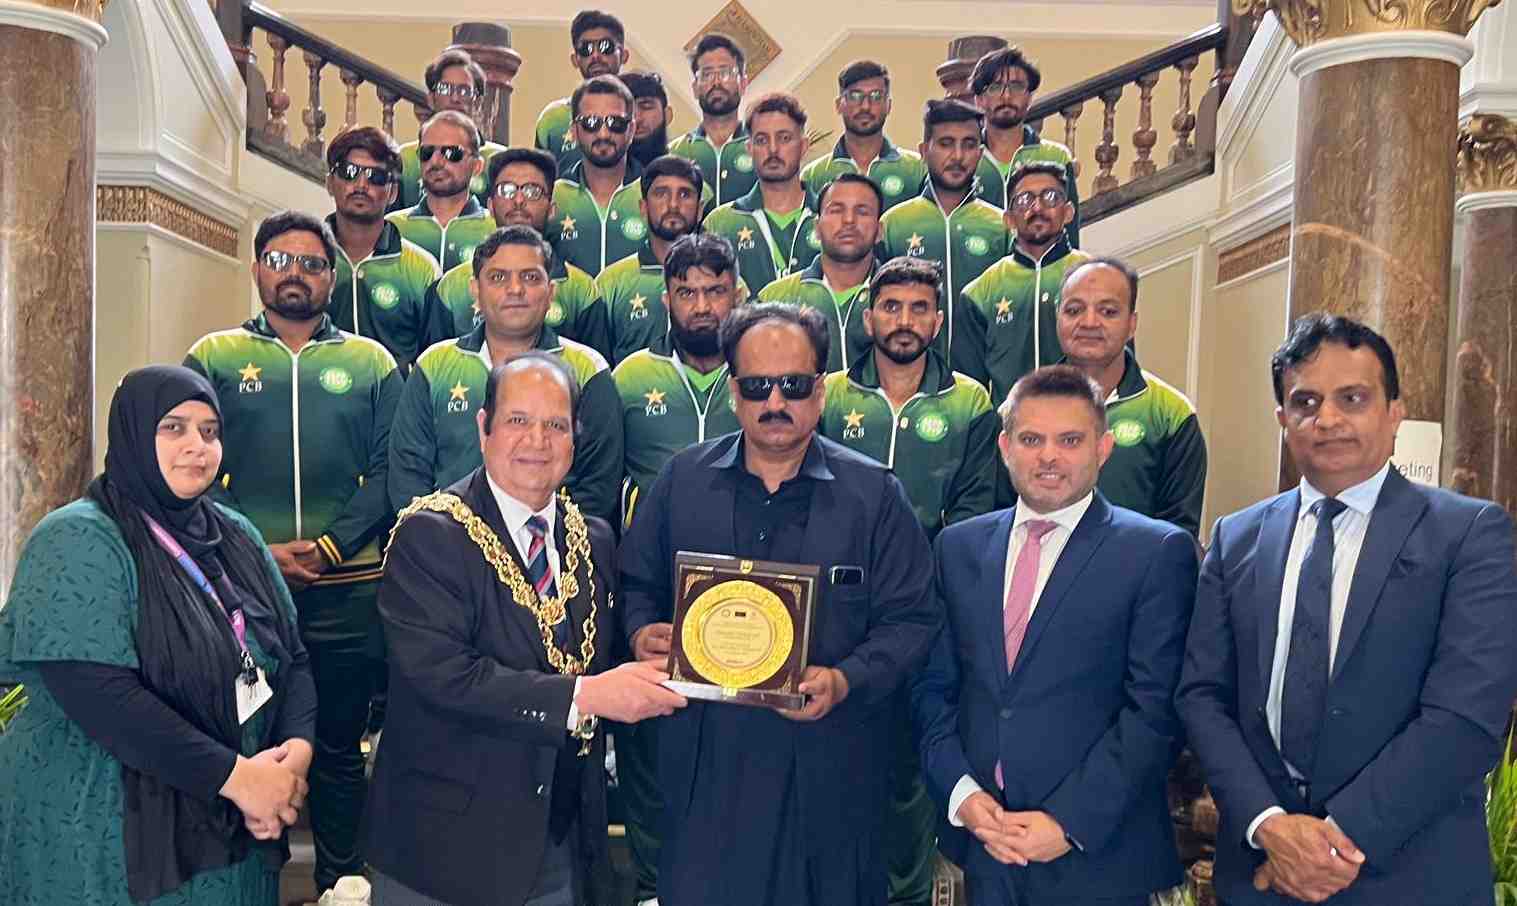 Mayor of Birmingham holds a reception for Pakistan Blinds Cricket Team